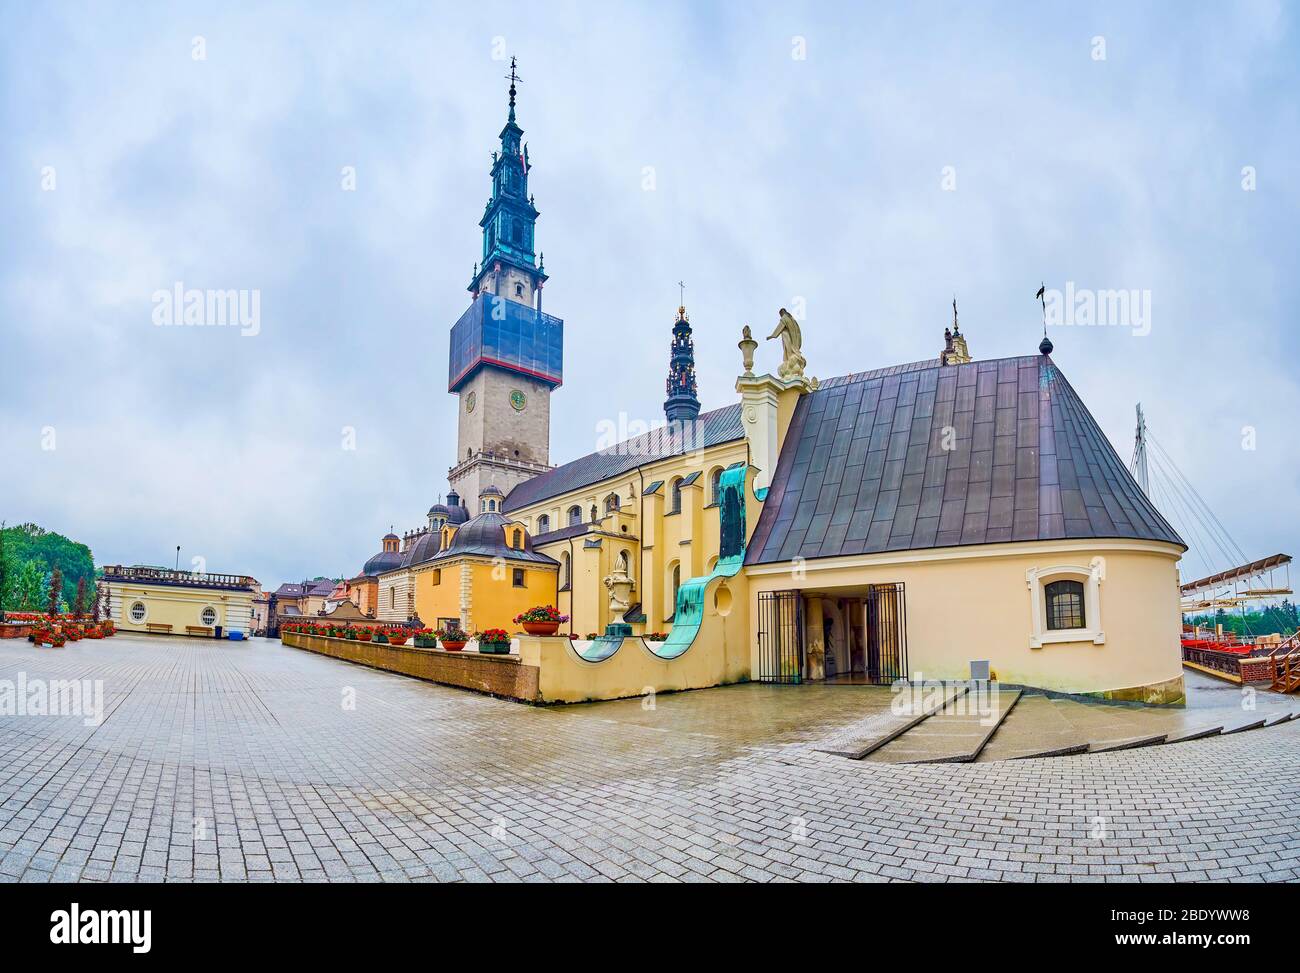 Panorama of the courtyard of Jasna Gora monastery complex with the entrance to Treasury in medieval chapel on the foreground, Czestochowa, Poland Stock Photo